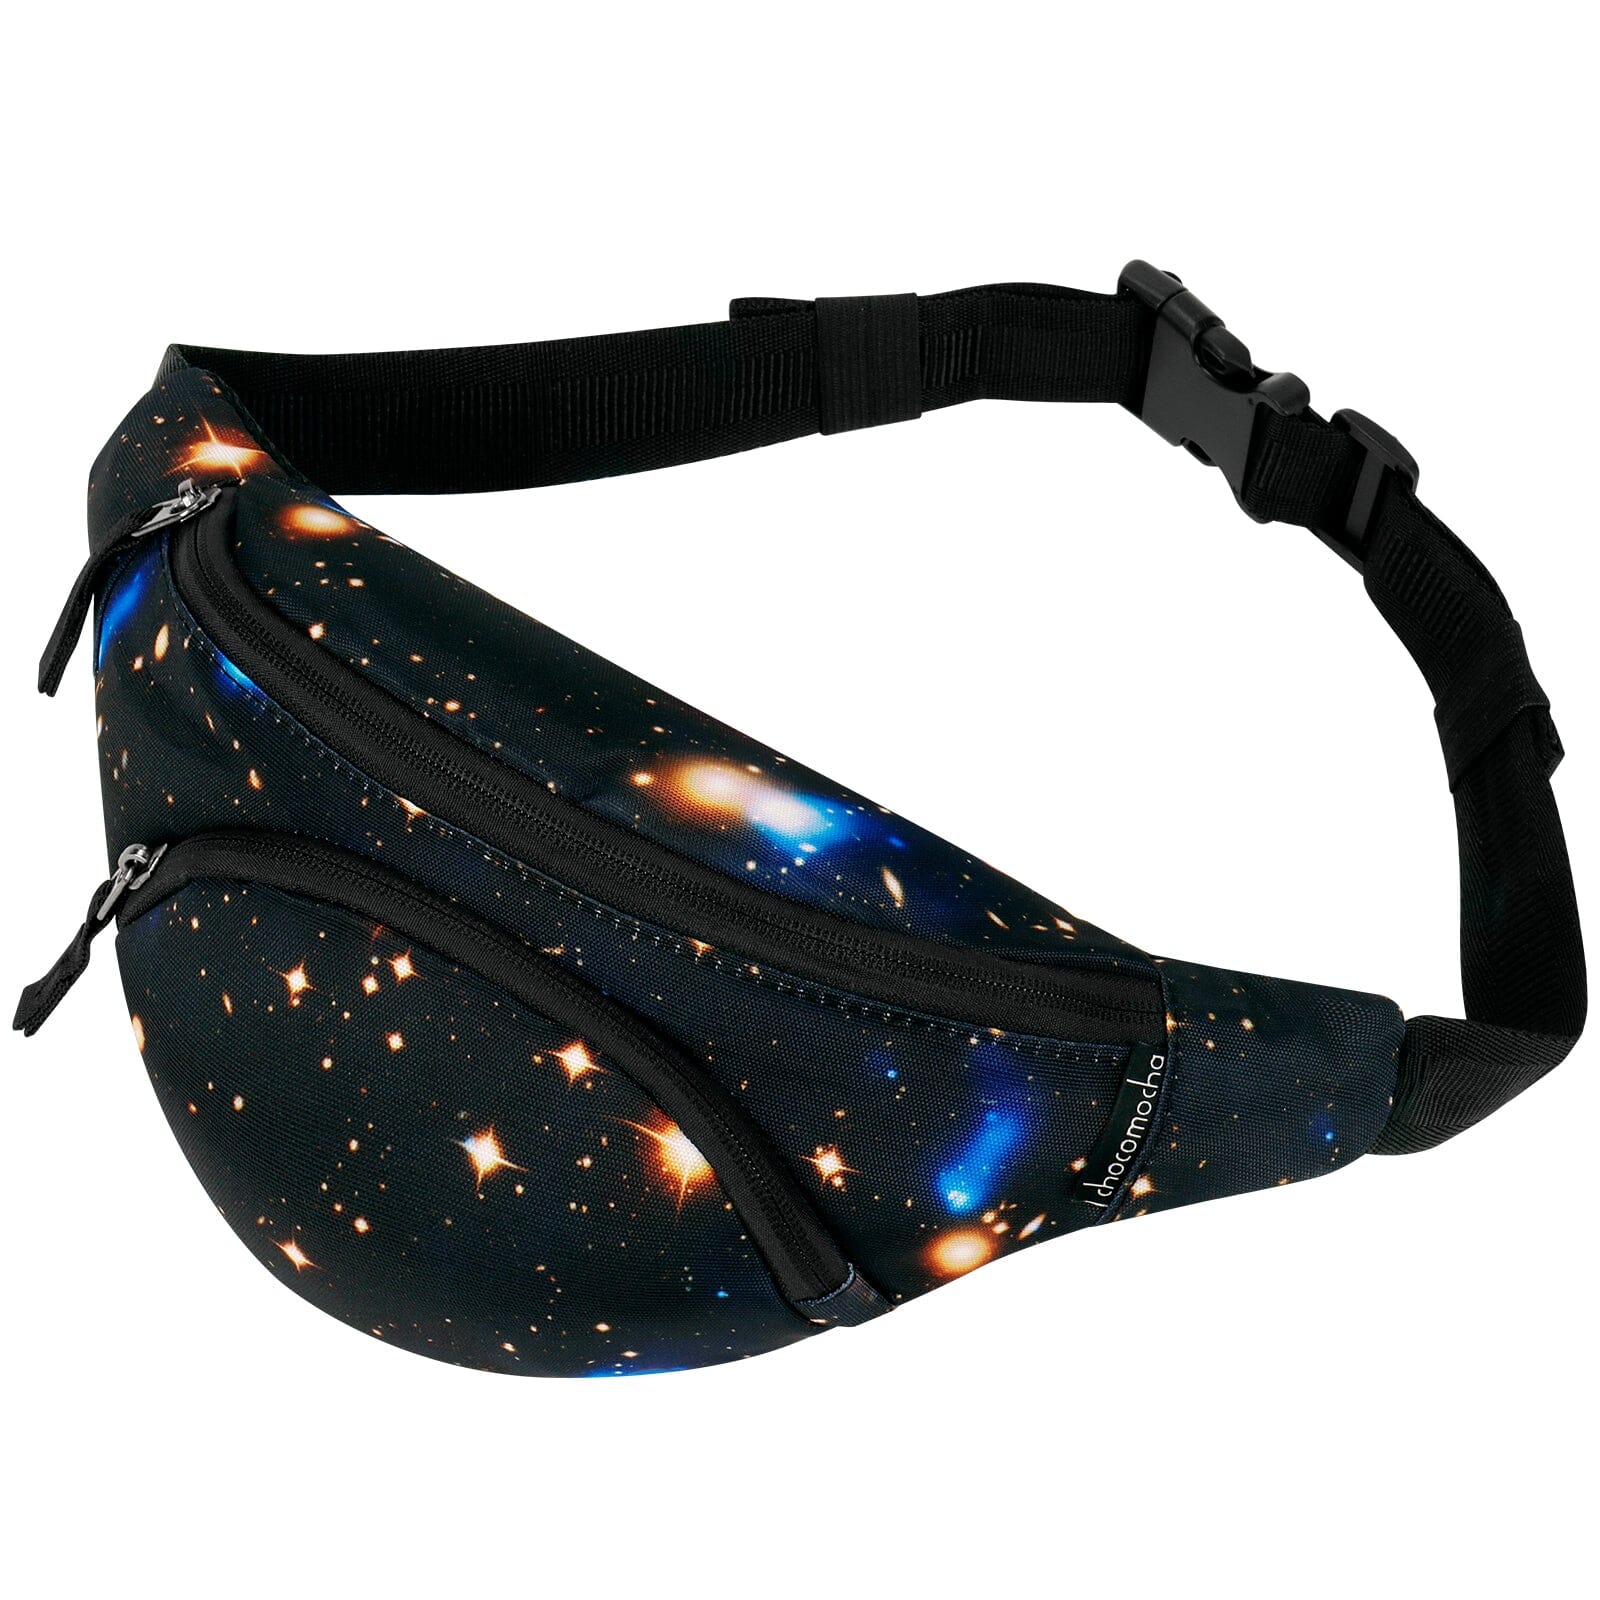 Choco Mocha Galaxy Kids Fanny Pack for Toddler Boys, Children Size Black Waist Pack 11.8*5.5 inches fanny pack chocomochakids 